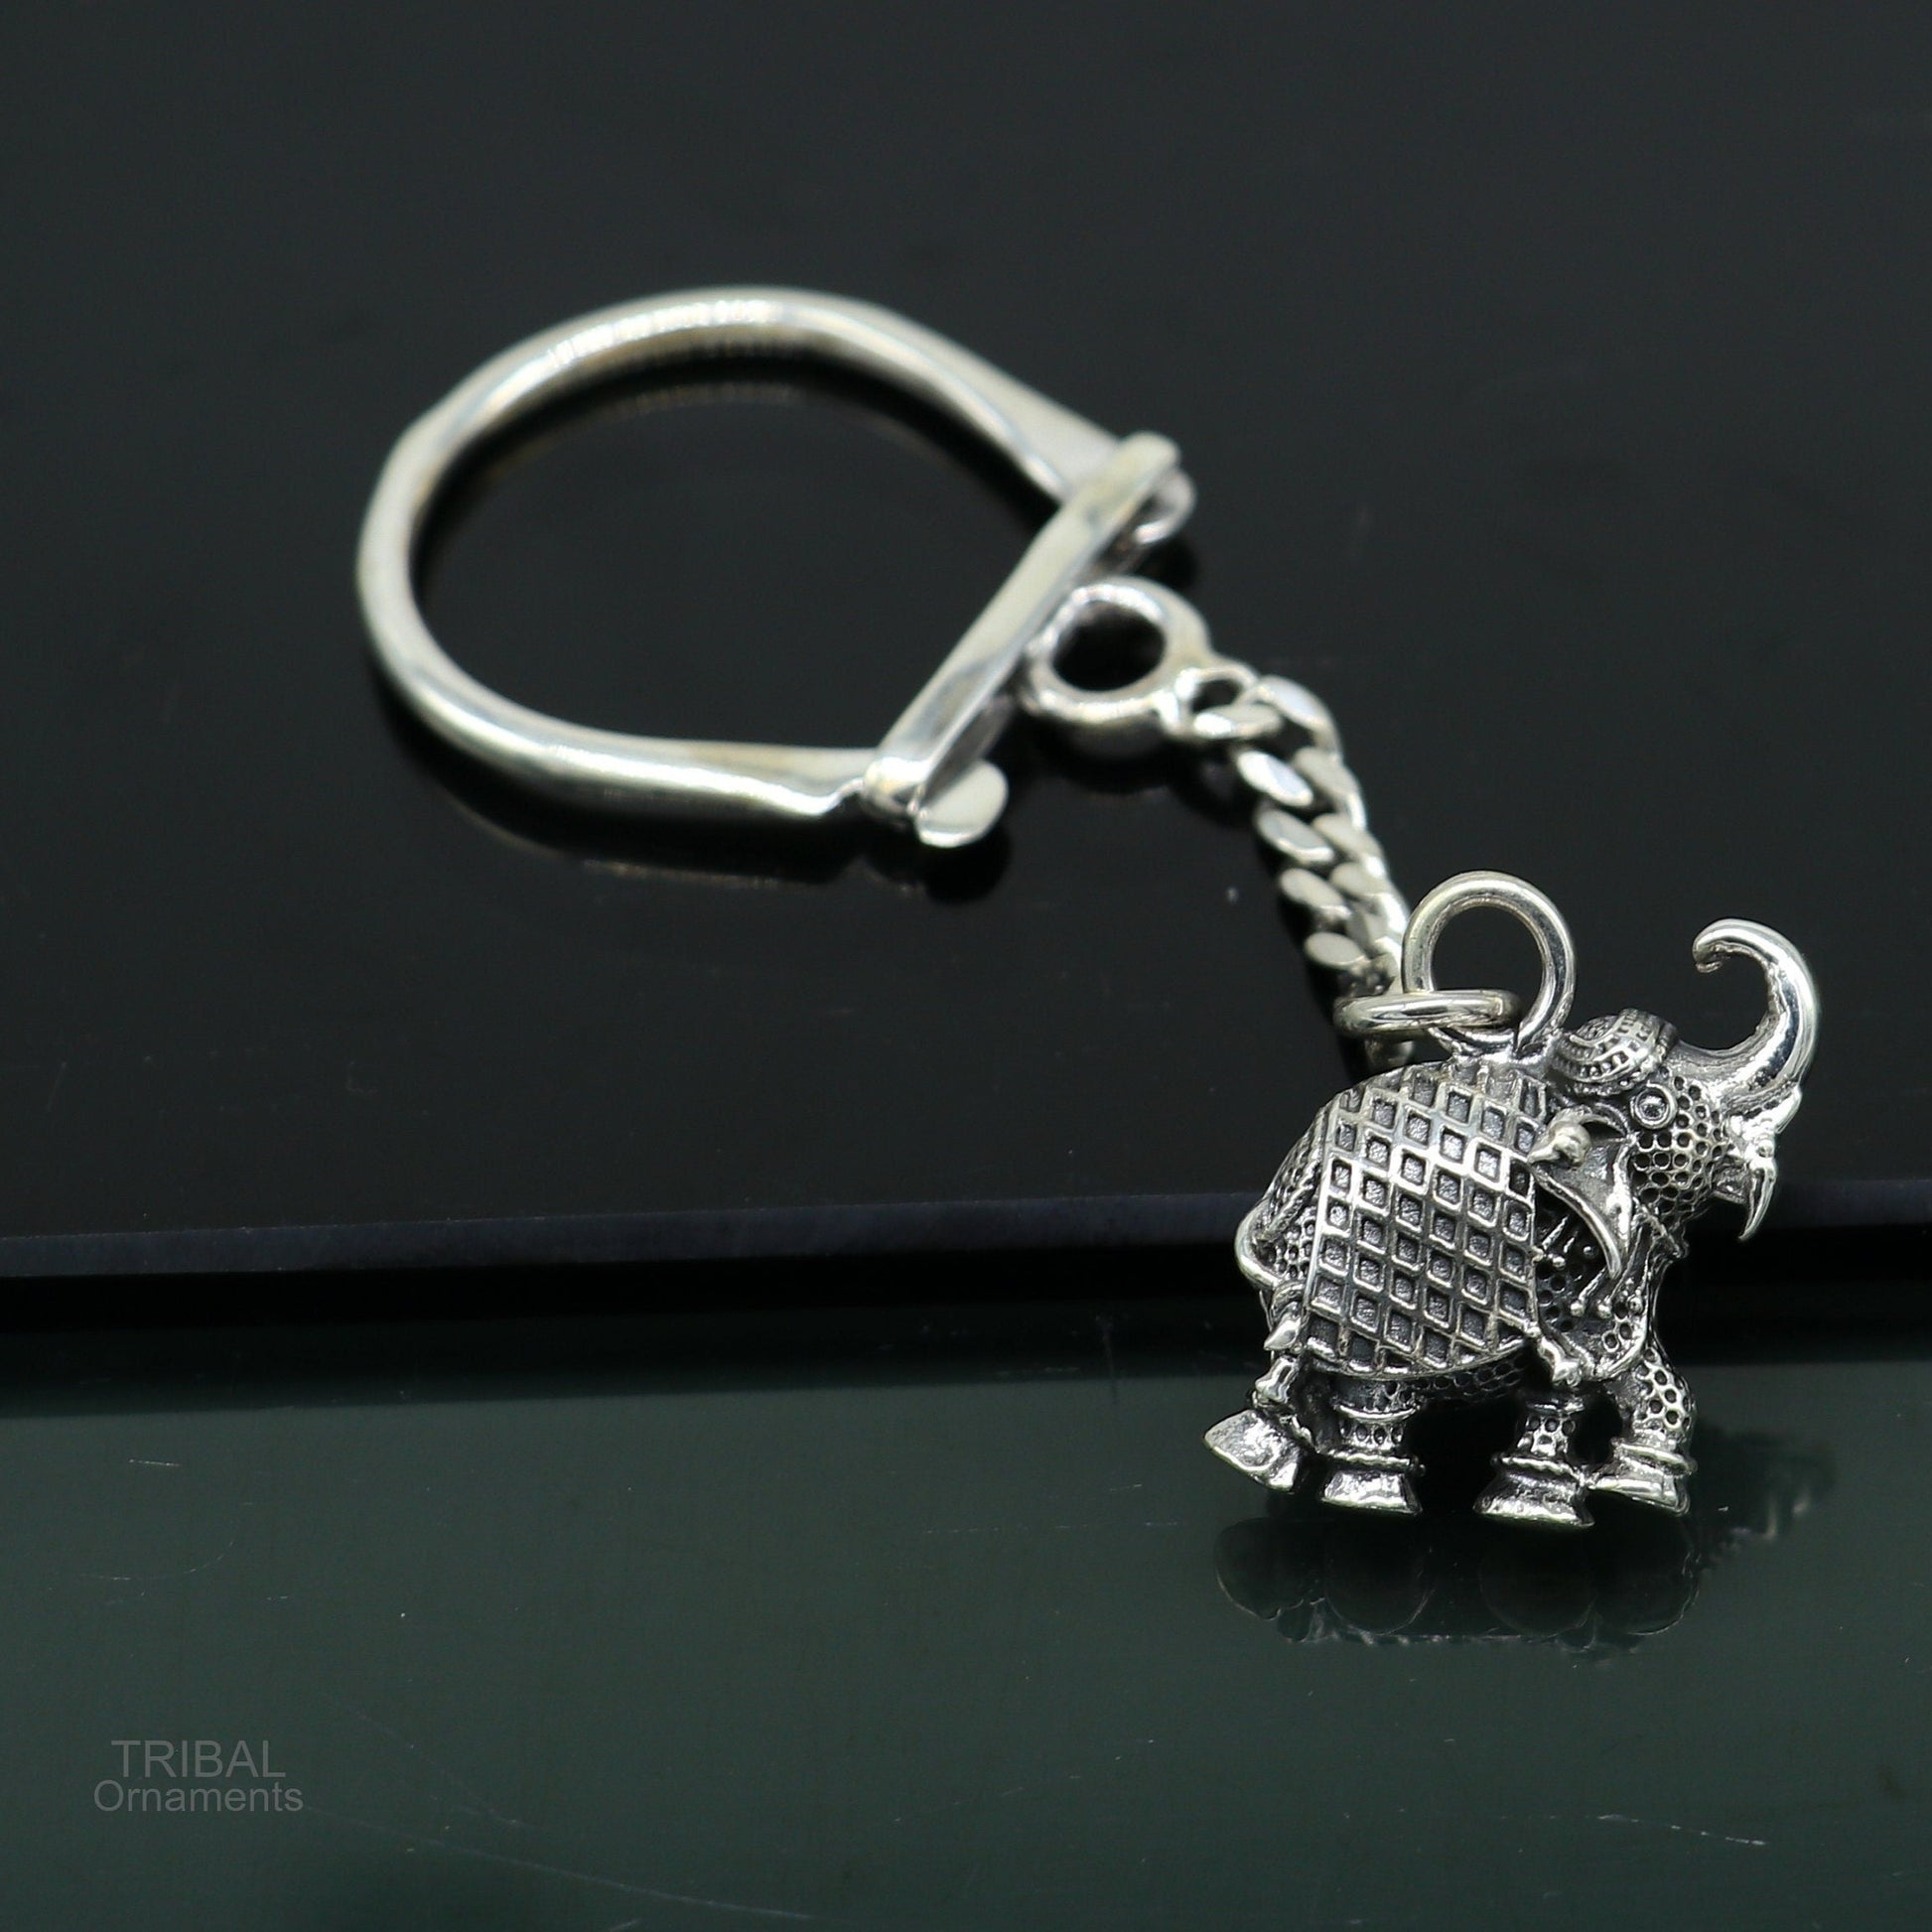 925 Sterling silver handmade unique vintage elephant design solid key chian, stylish royal gifting silver accessories unisex gift kch10 - TRIBAL ORNAMENTS